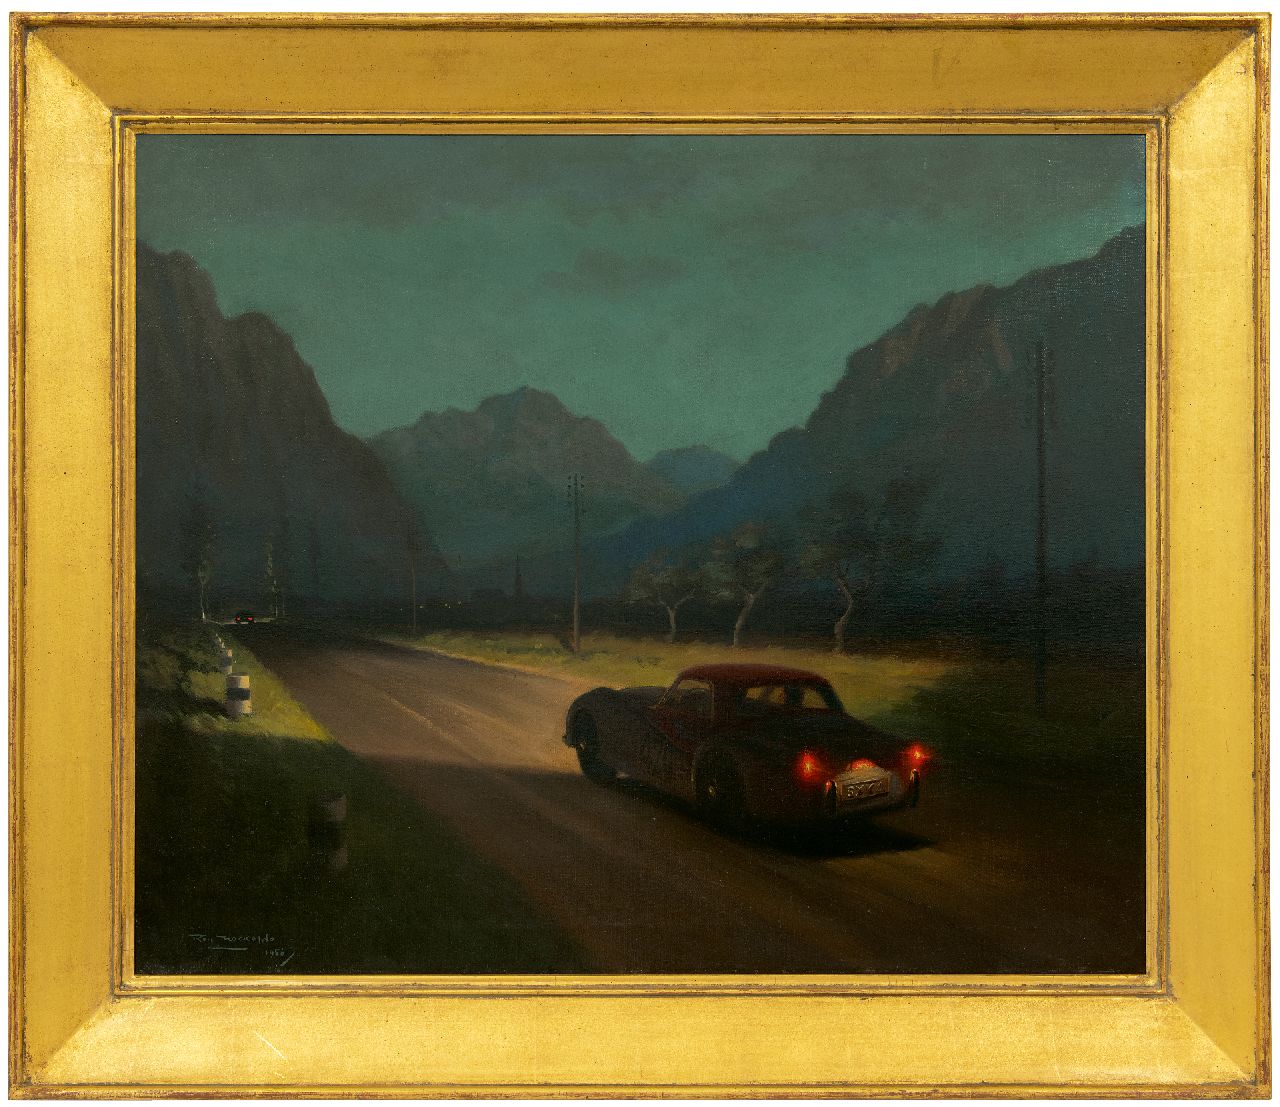 Nockolds R.A.  | Roy Anthony Nockolds, Rally in the Alps  - Triumph TR3, oil on canvas 63.5 x 76.4 cm, signed l.l. and dated 1956